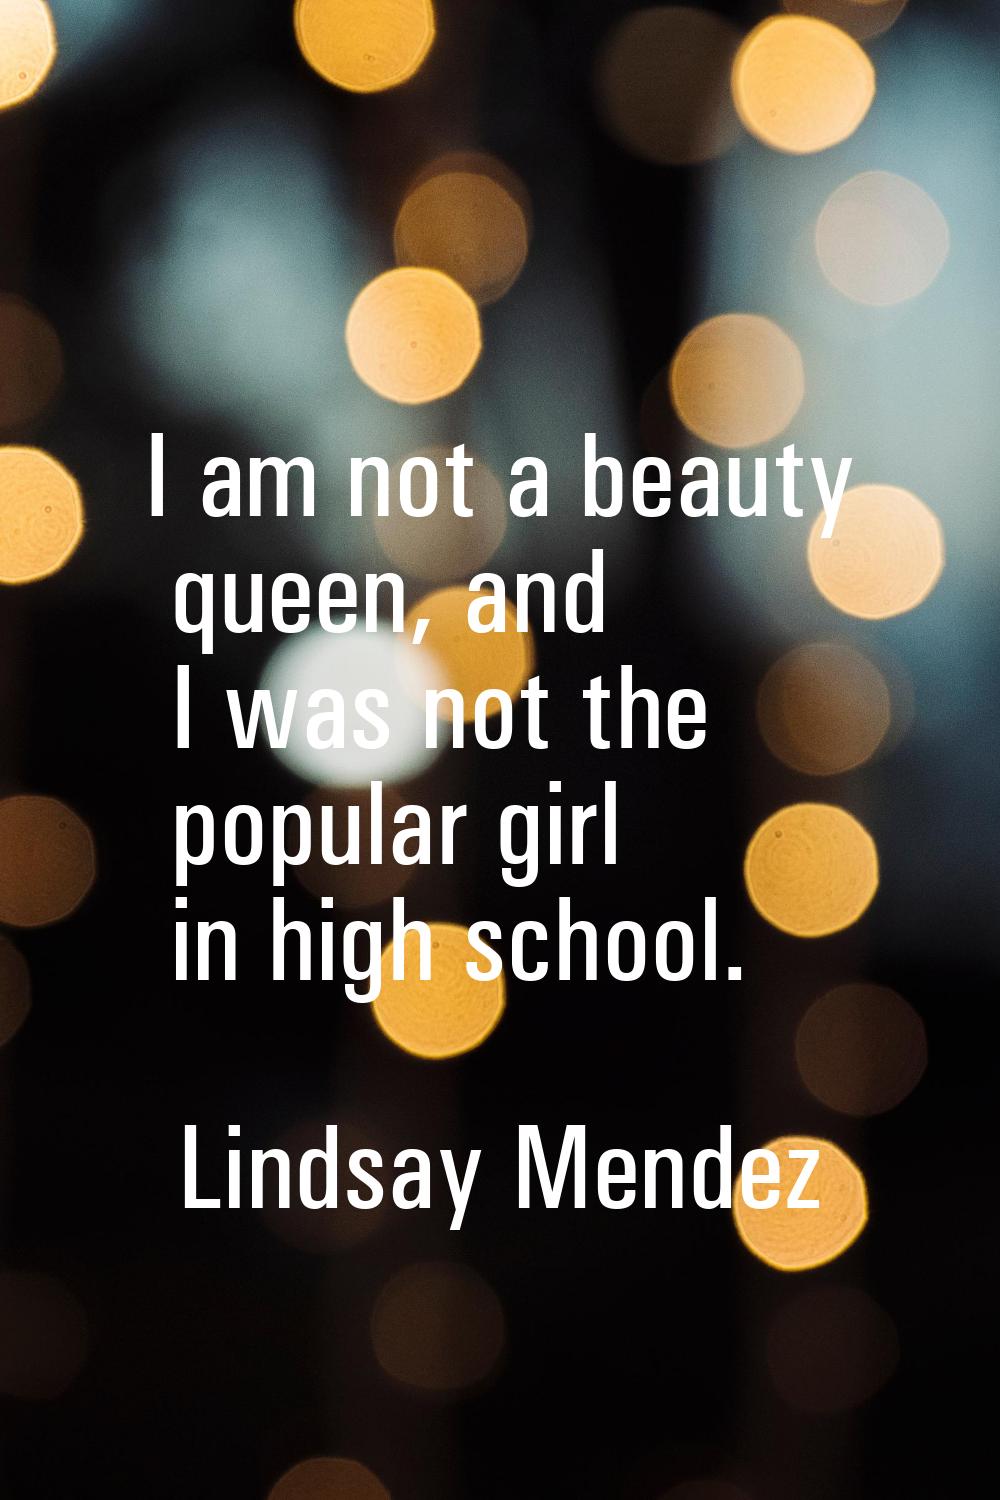 I am not a beauty queen, and I was not the popular girl in high school.